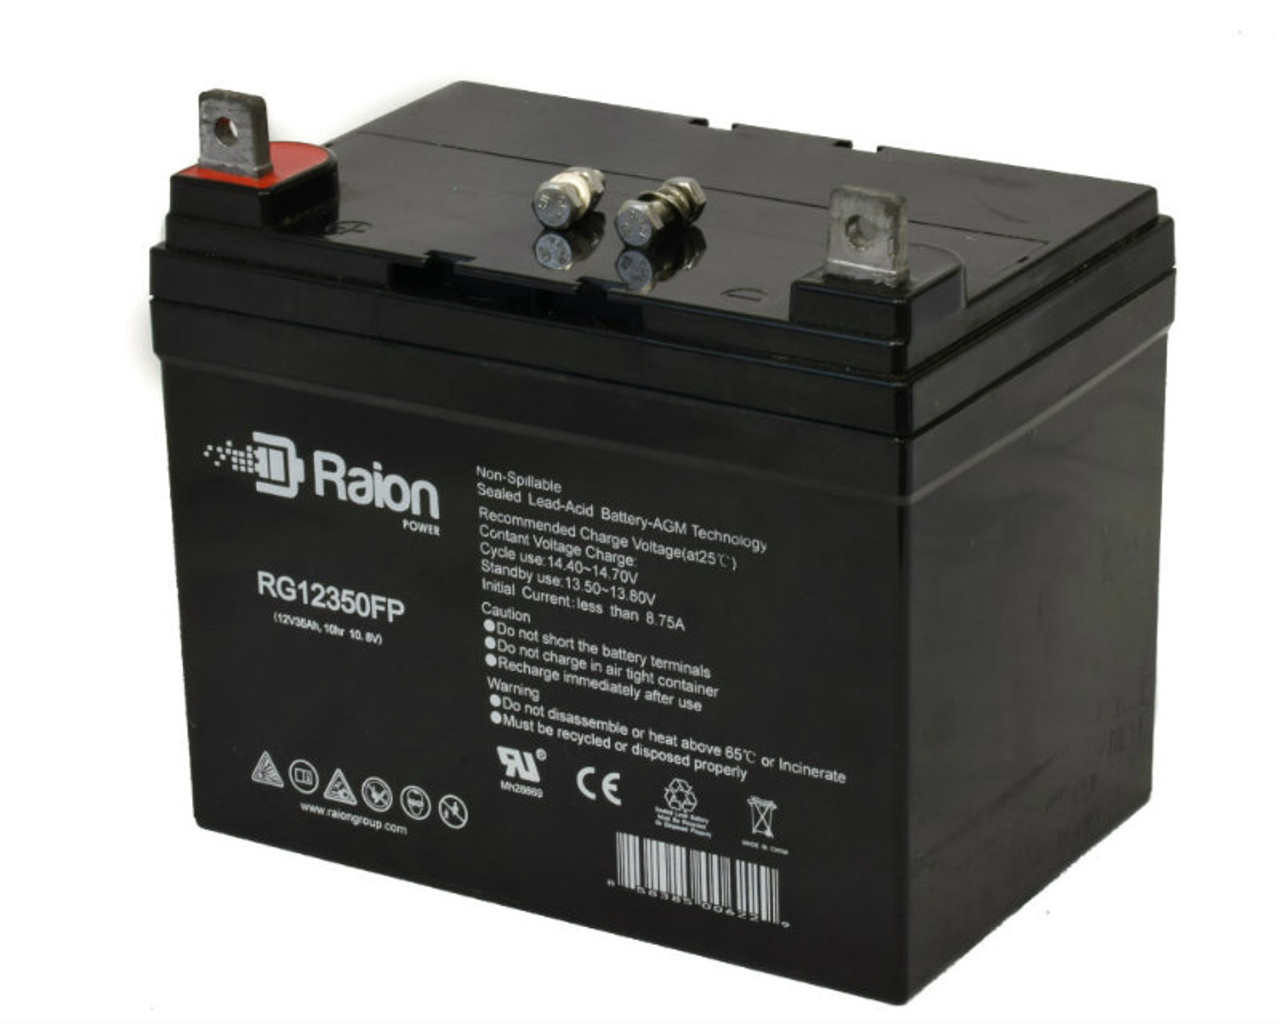 Raion Power Replacement 12V 35Ah Battery for Yazoo Kees ZKW 61252 - 1 Pack